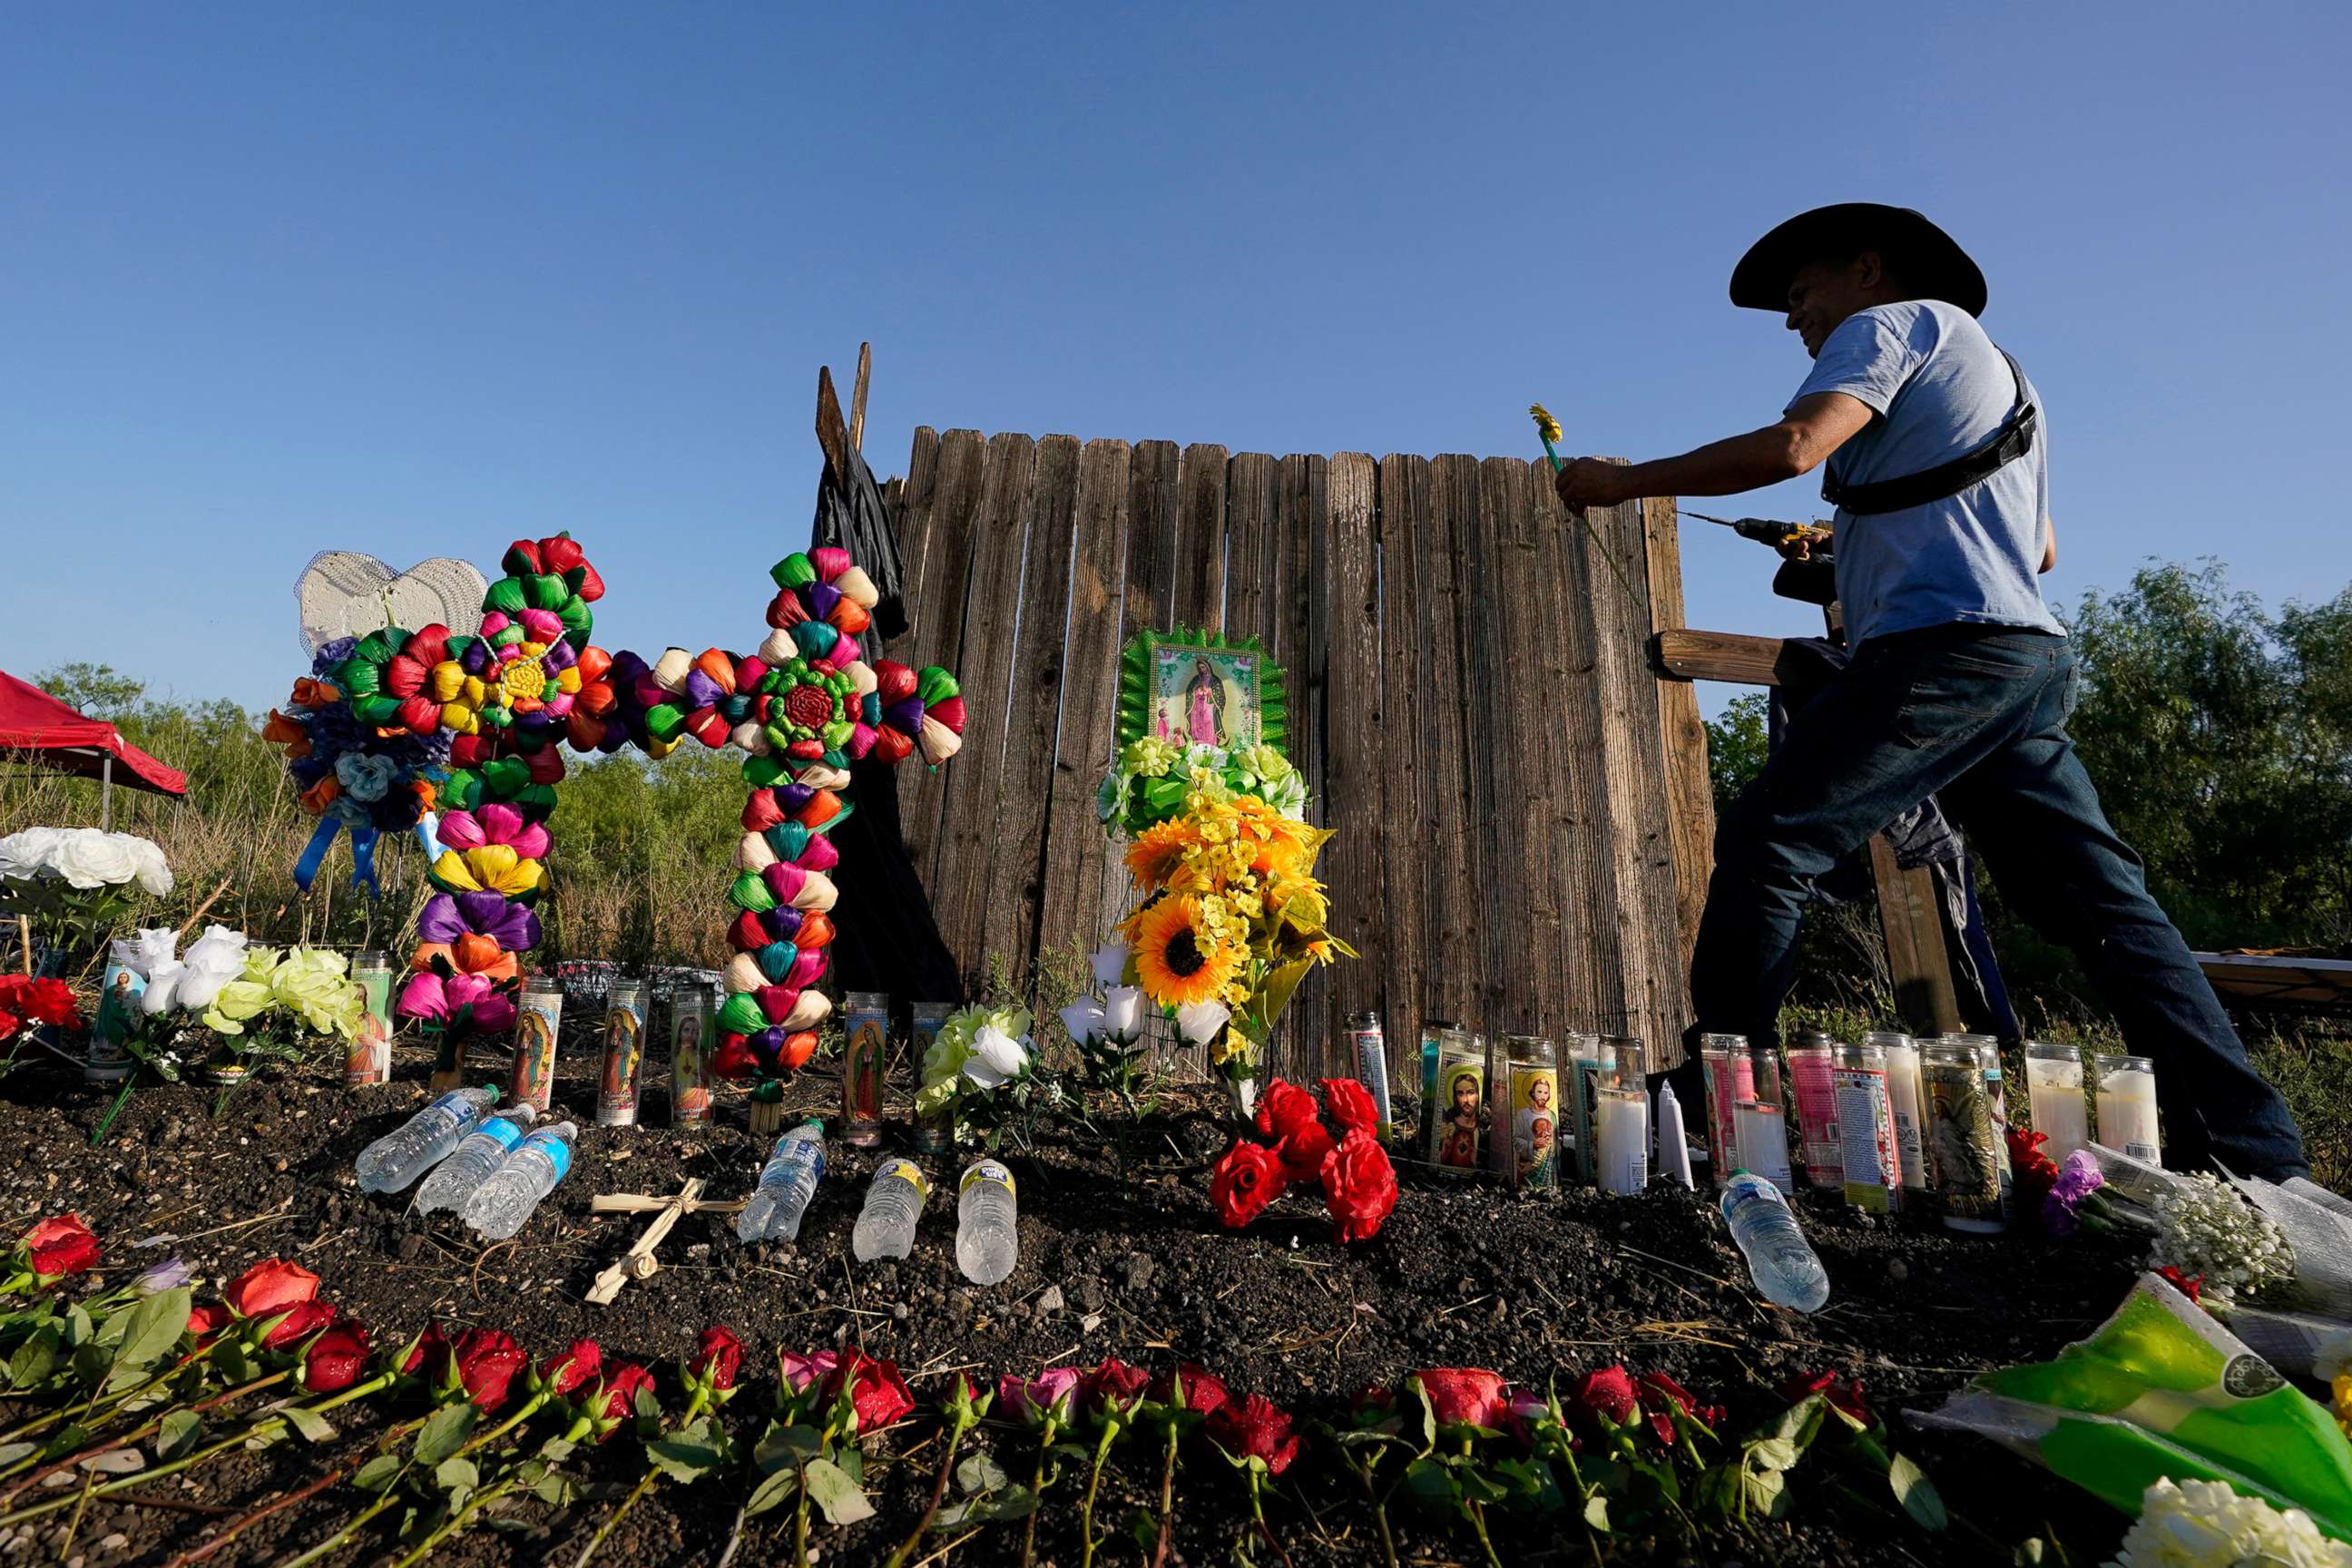 PHOTO: Roberto Marquez of Dallas adds a flower a make-shift memorial at the site where officials found dozens of people dead in an abandoned semitrailer containing suspected migrants in in San Antonio, Texas, June 29, 2022.